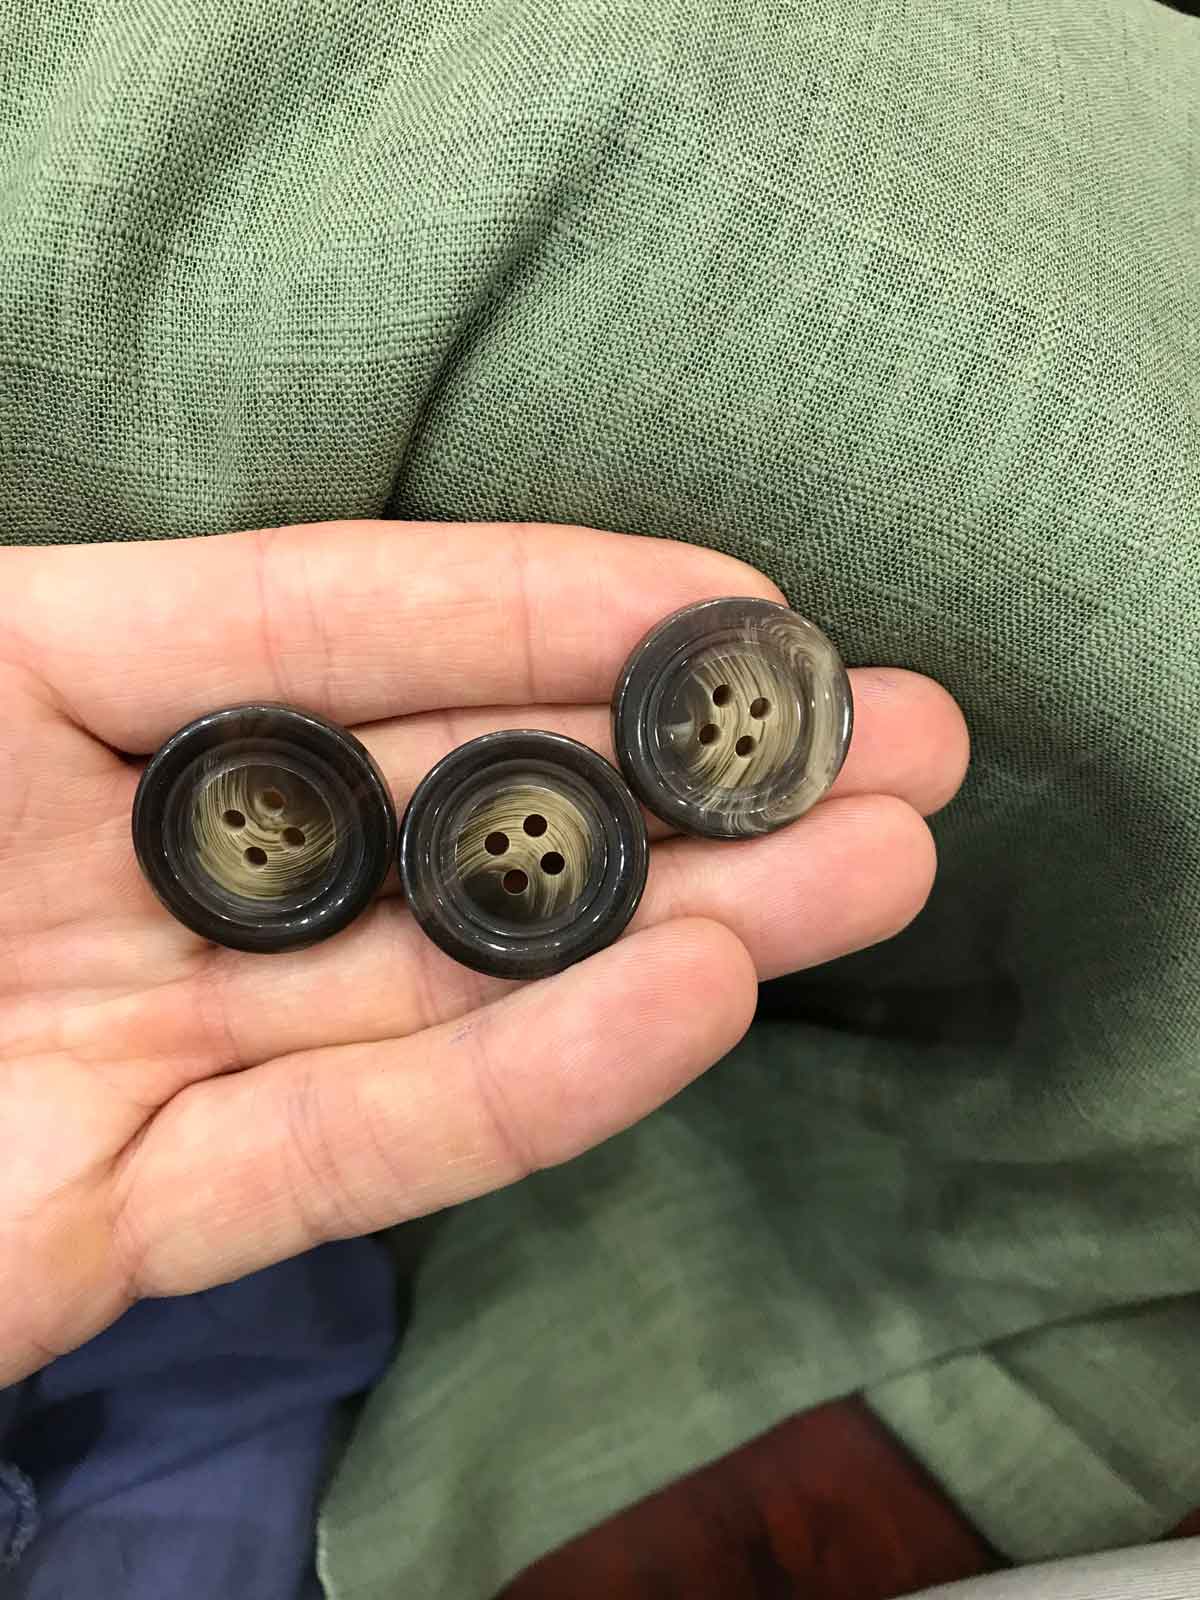 Jacket buttons